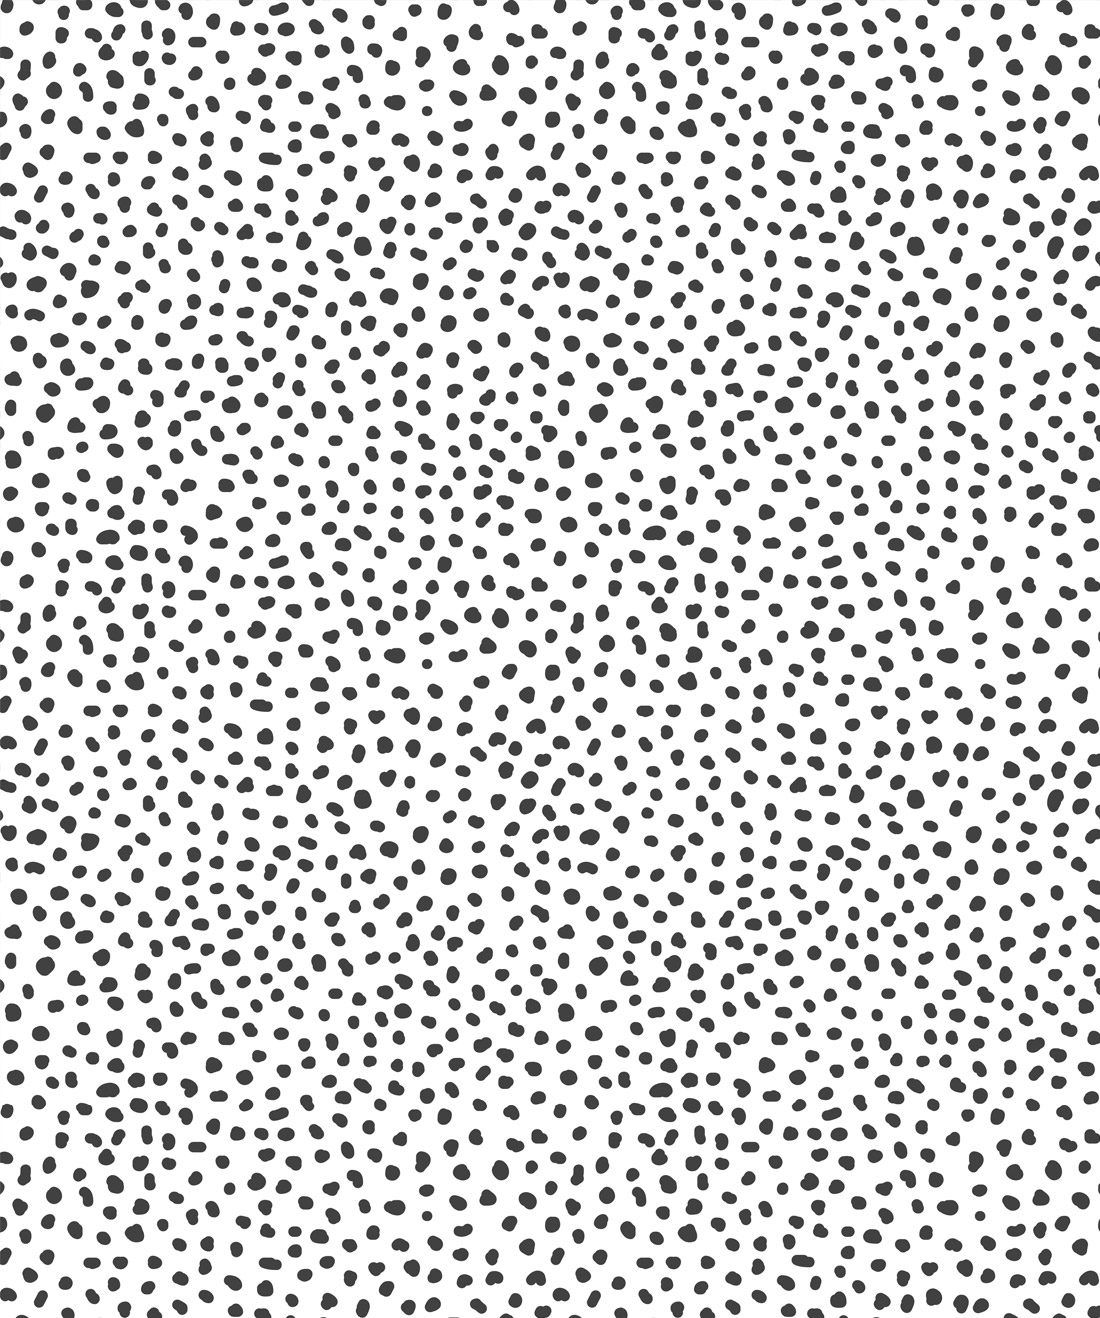 Huddy's Dots • Muddy • Spotted Wallpaper • Swatch